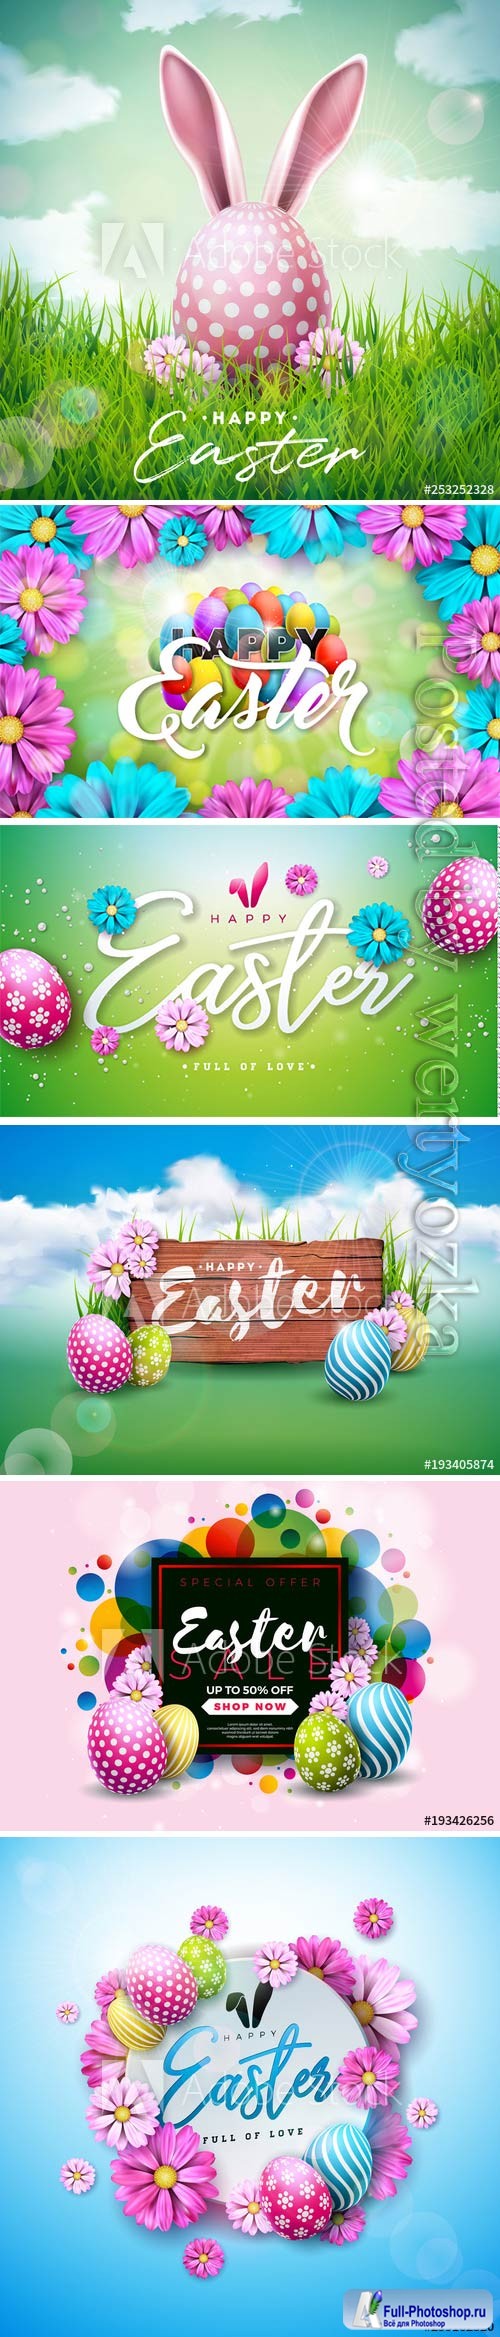 Happy Easter holiday with painted egg, rabbit ears and flower